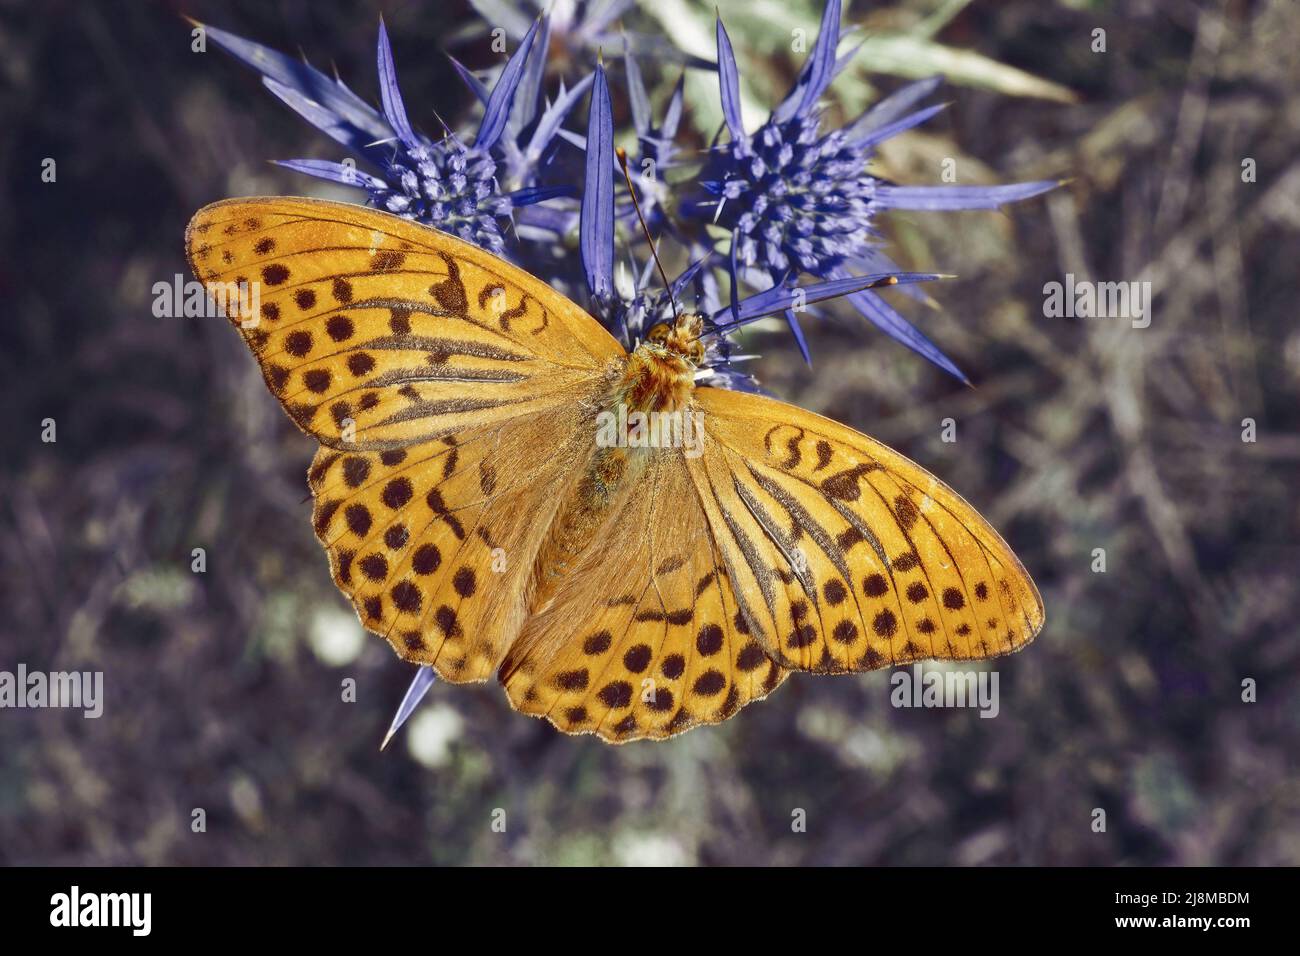 male specimen of silver-washed fritillary butterfly, Argynnis paphia, Nymphalidae, rests on a italian eryngo plant Stock Photo